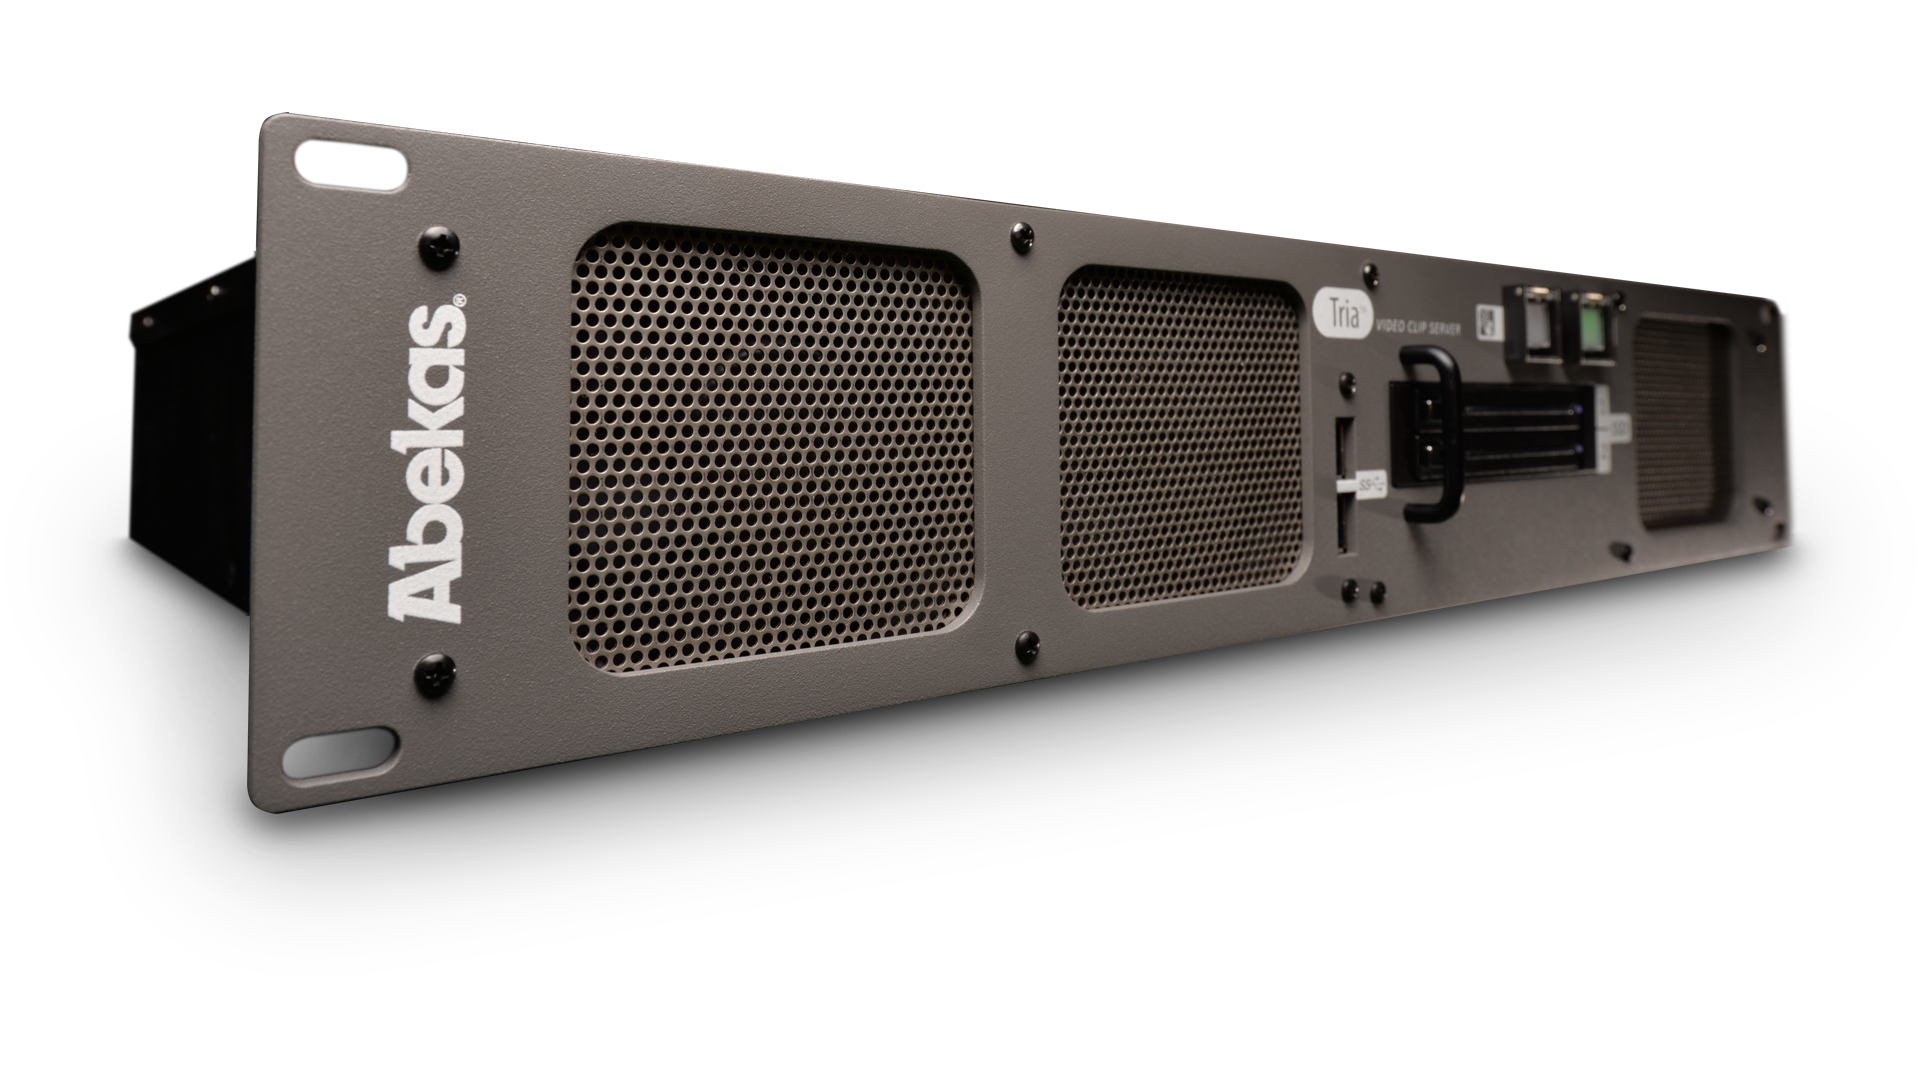 Nab 2017 Ross Video Two Channel Tria Clip Server Shipping